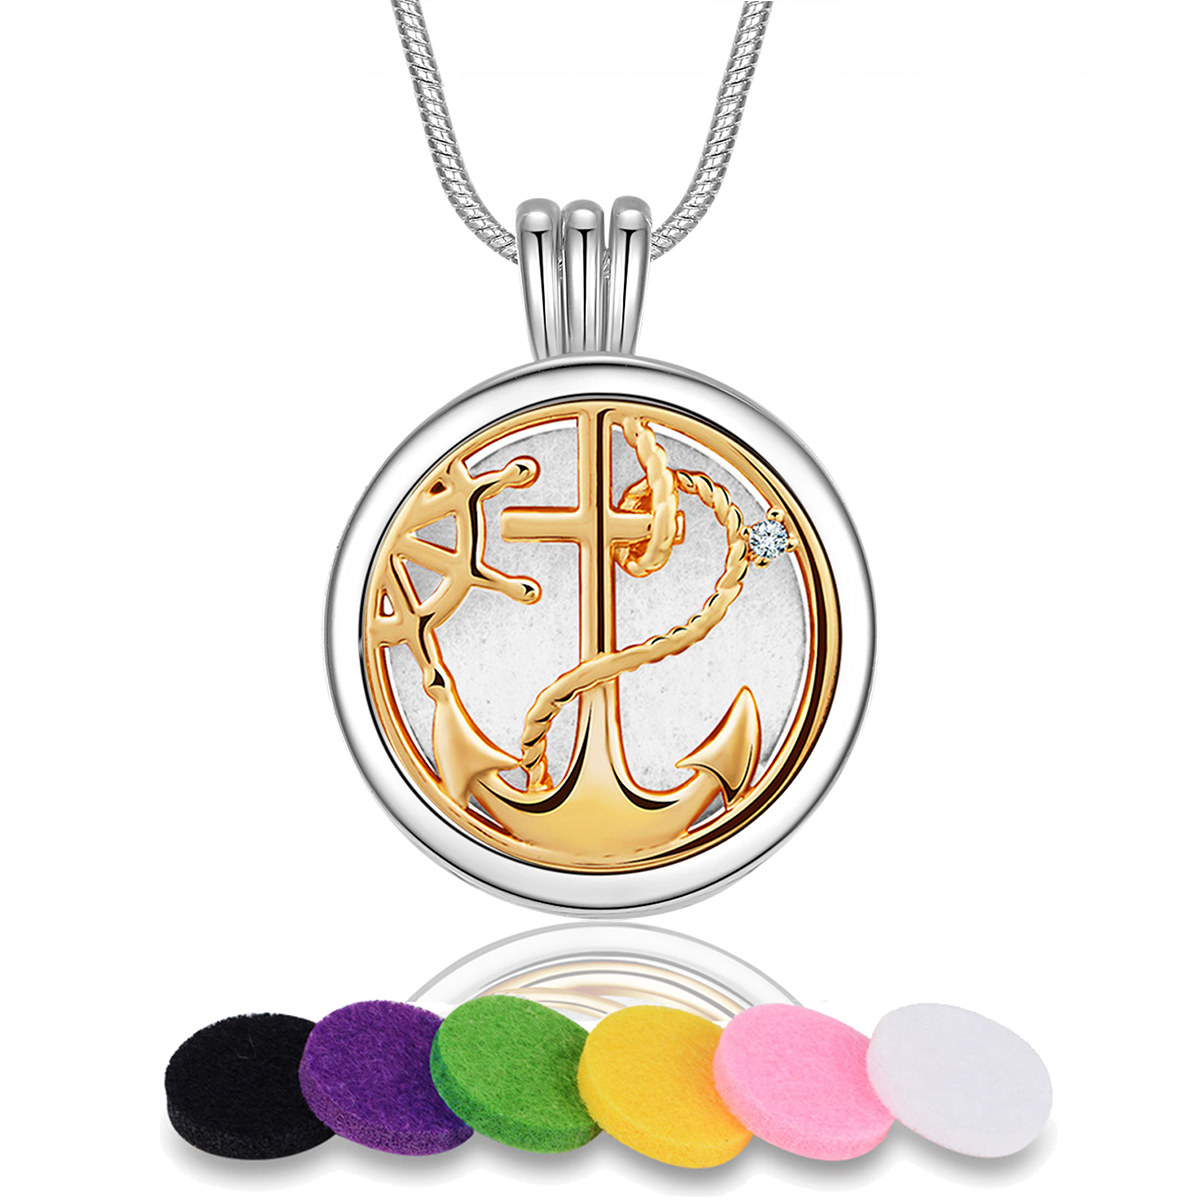 Merryshine Jewelry Copper Plating Silver Flat Hollow Golden Anchor Design Essential Oil Necklace Diffuser for Women